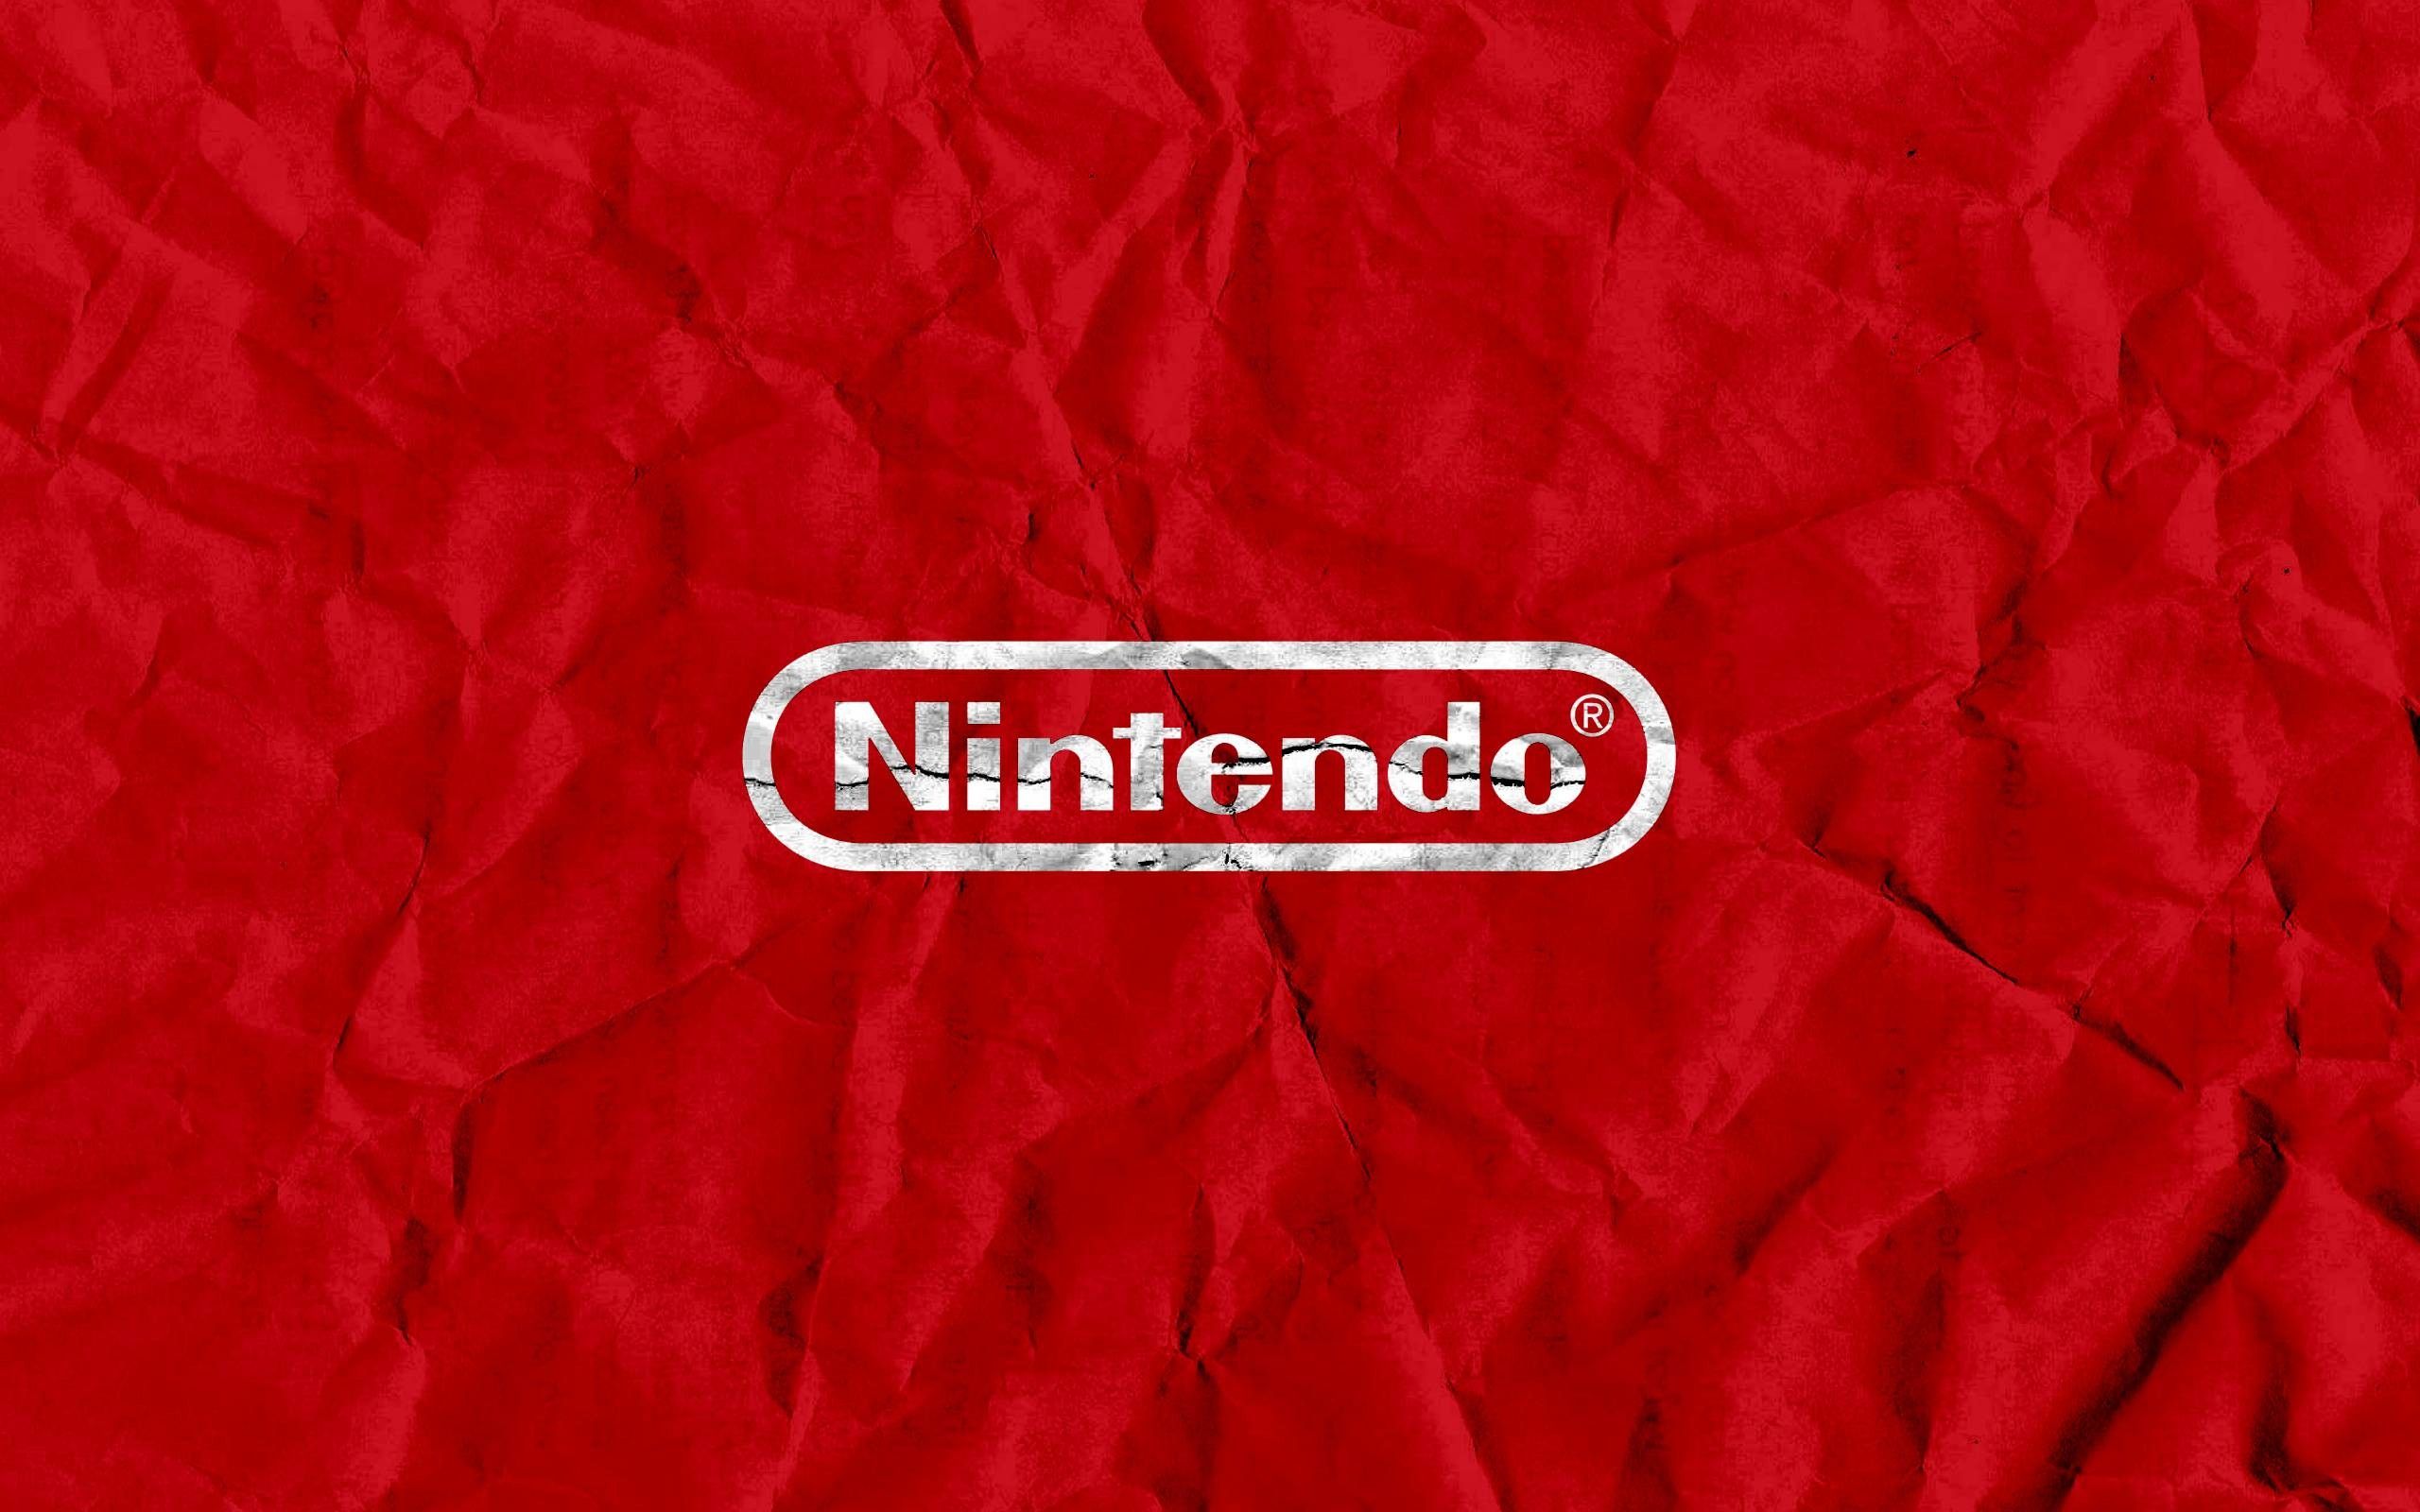 The nintendo logo on a red background - Nintendo